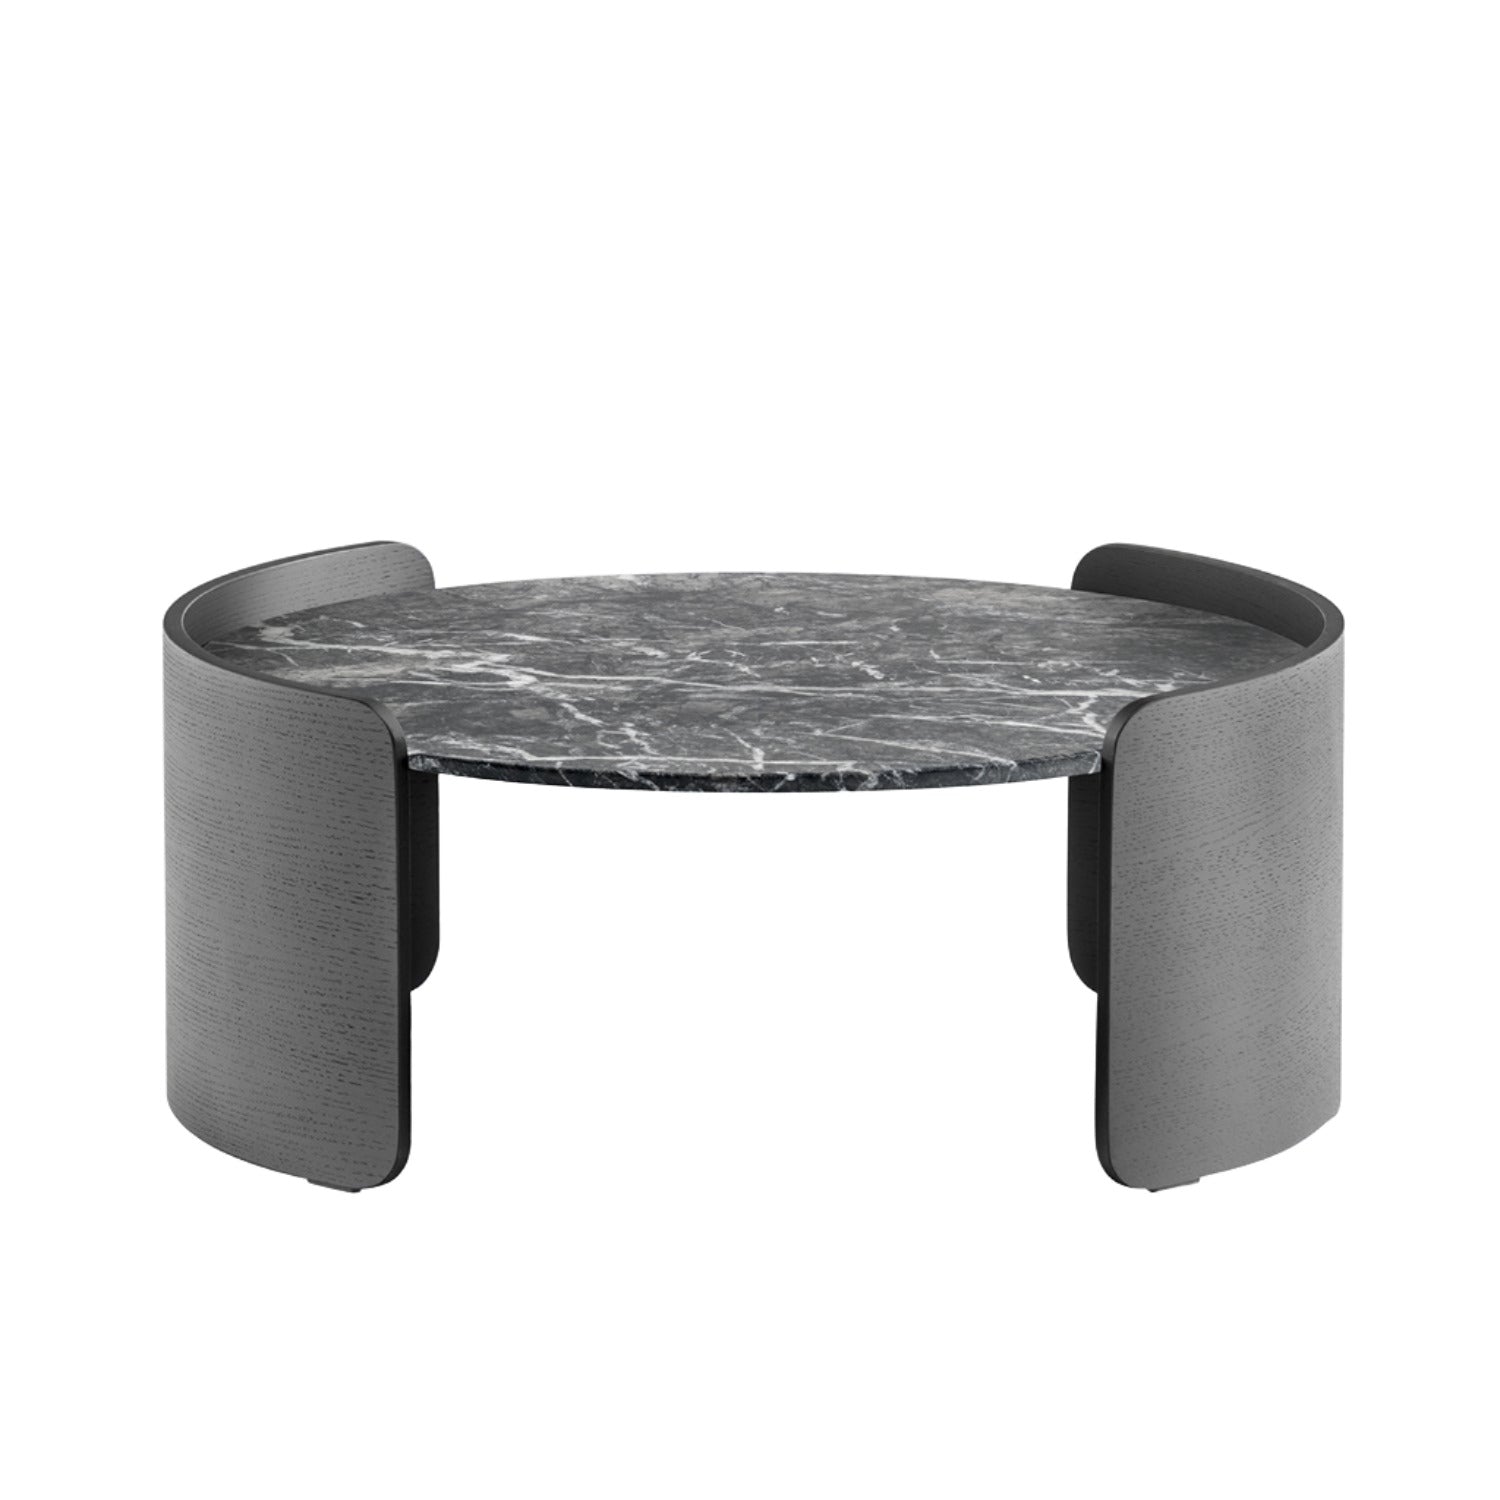 Pedrali Parenthesis coffee table in black oak frame and black marble top